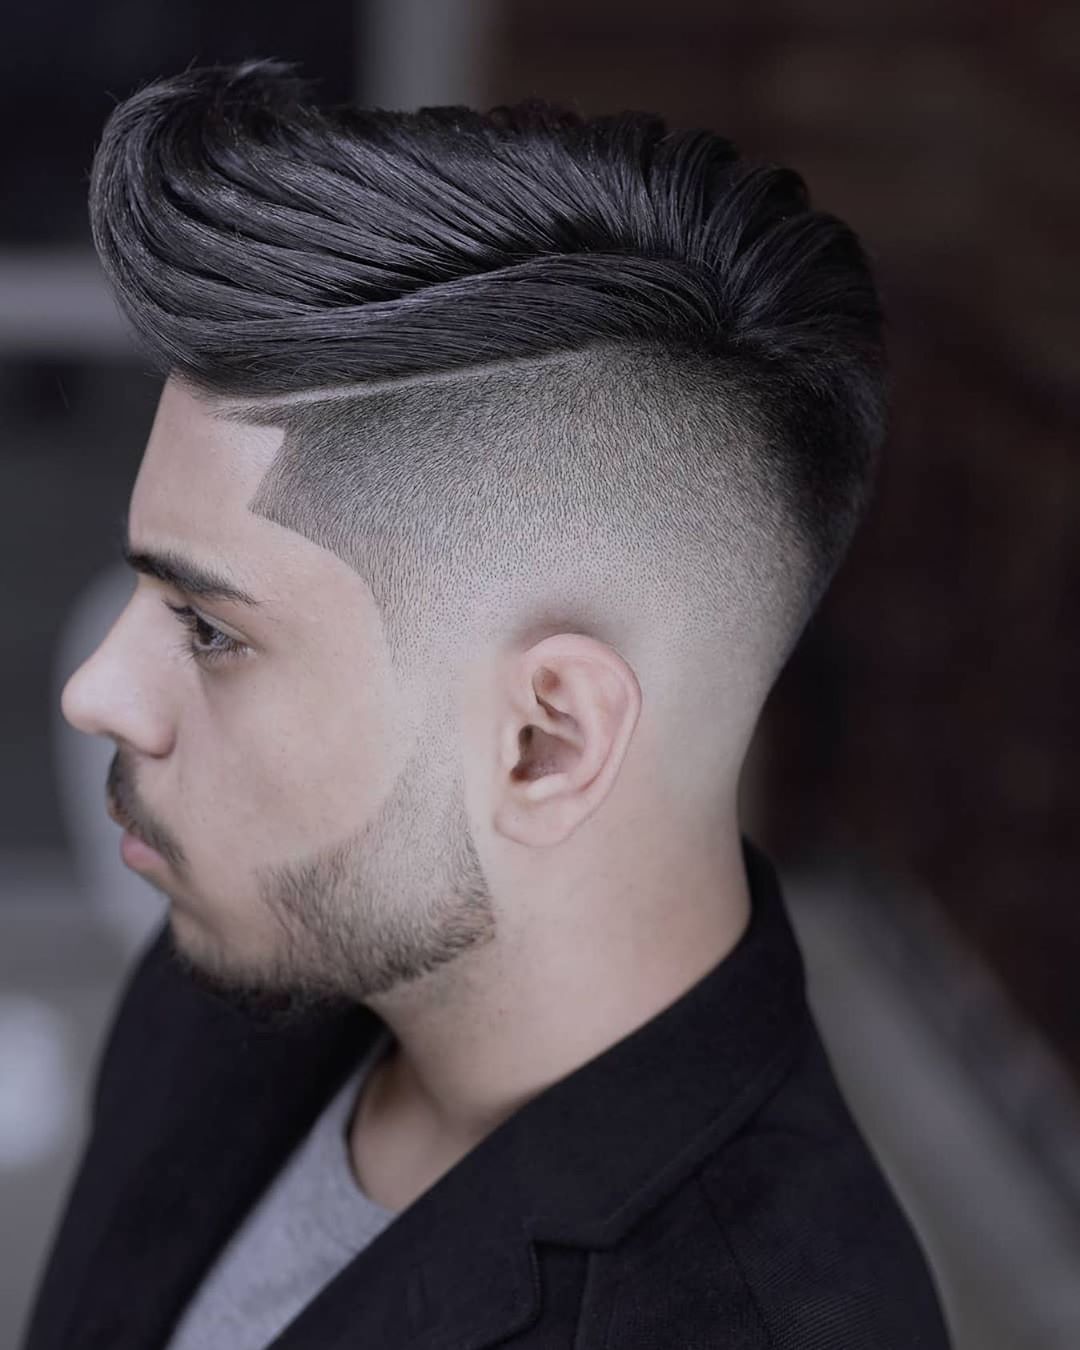 60 Best Young Men's Haircuts | The latest young men's hairstyles 2020 ...